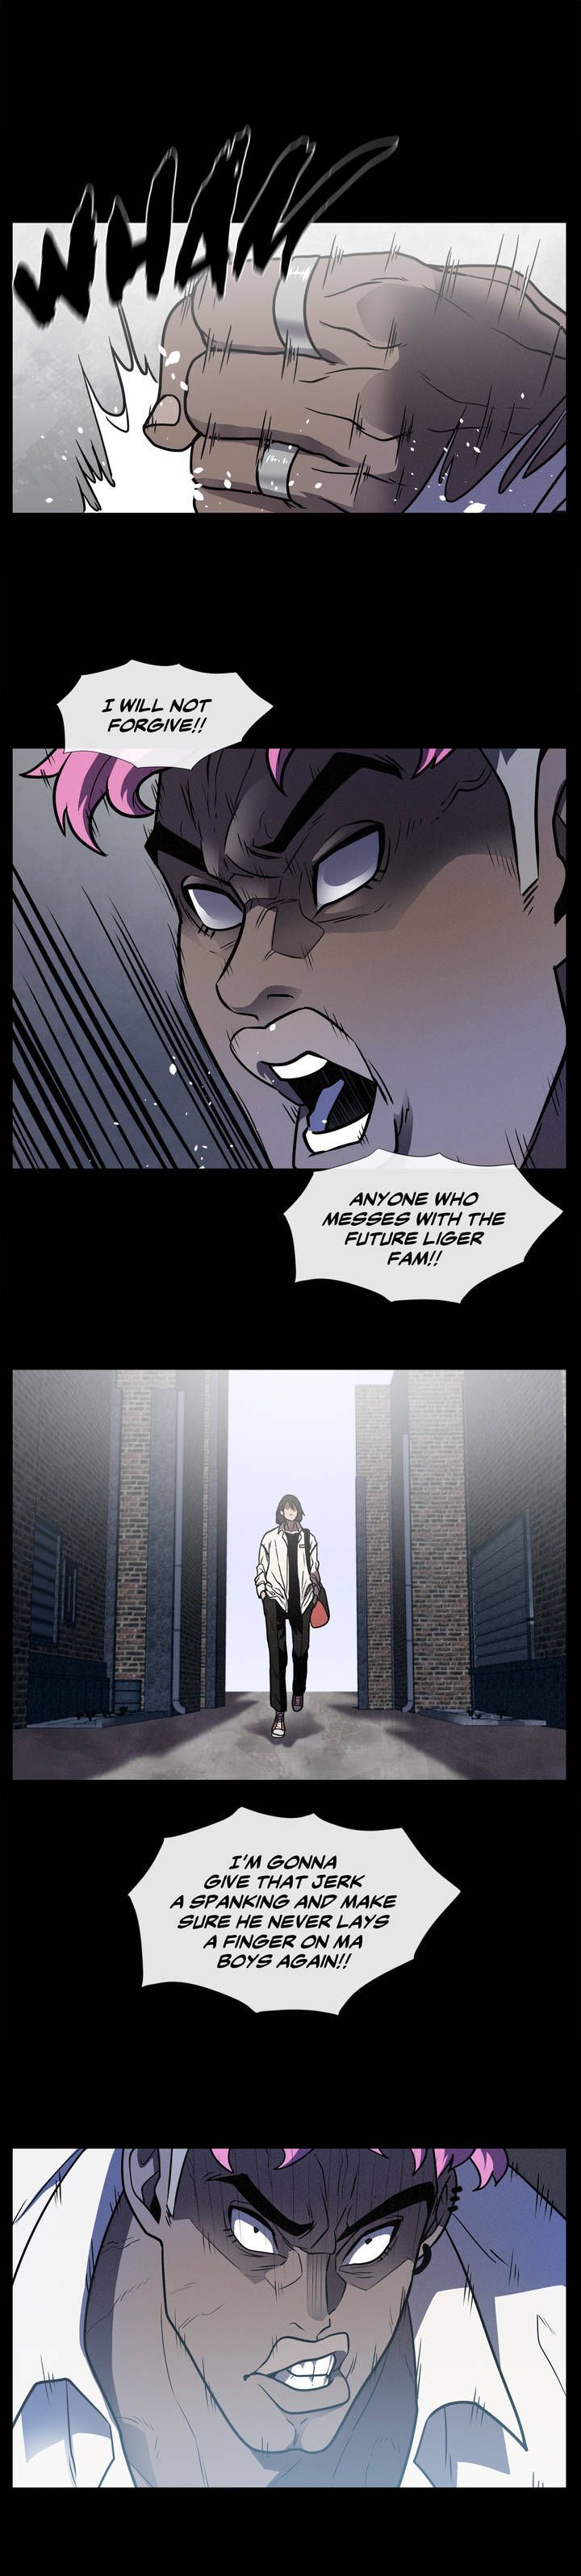 The Devil's Boy Chapter 014 page 2